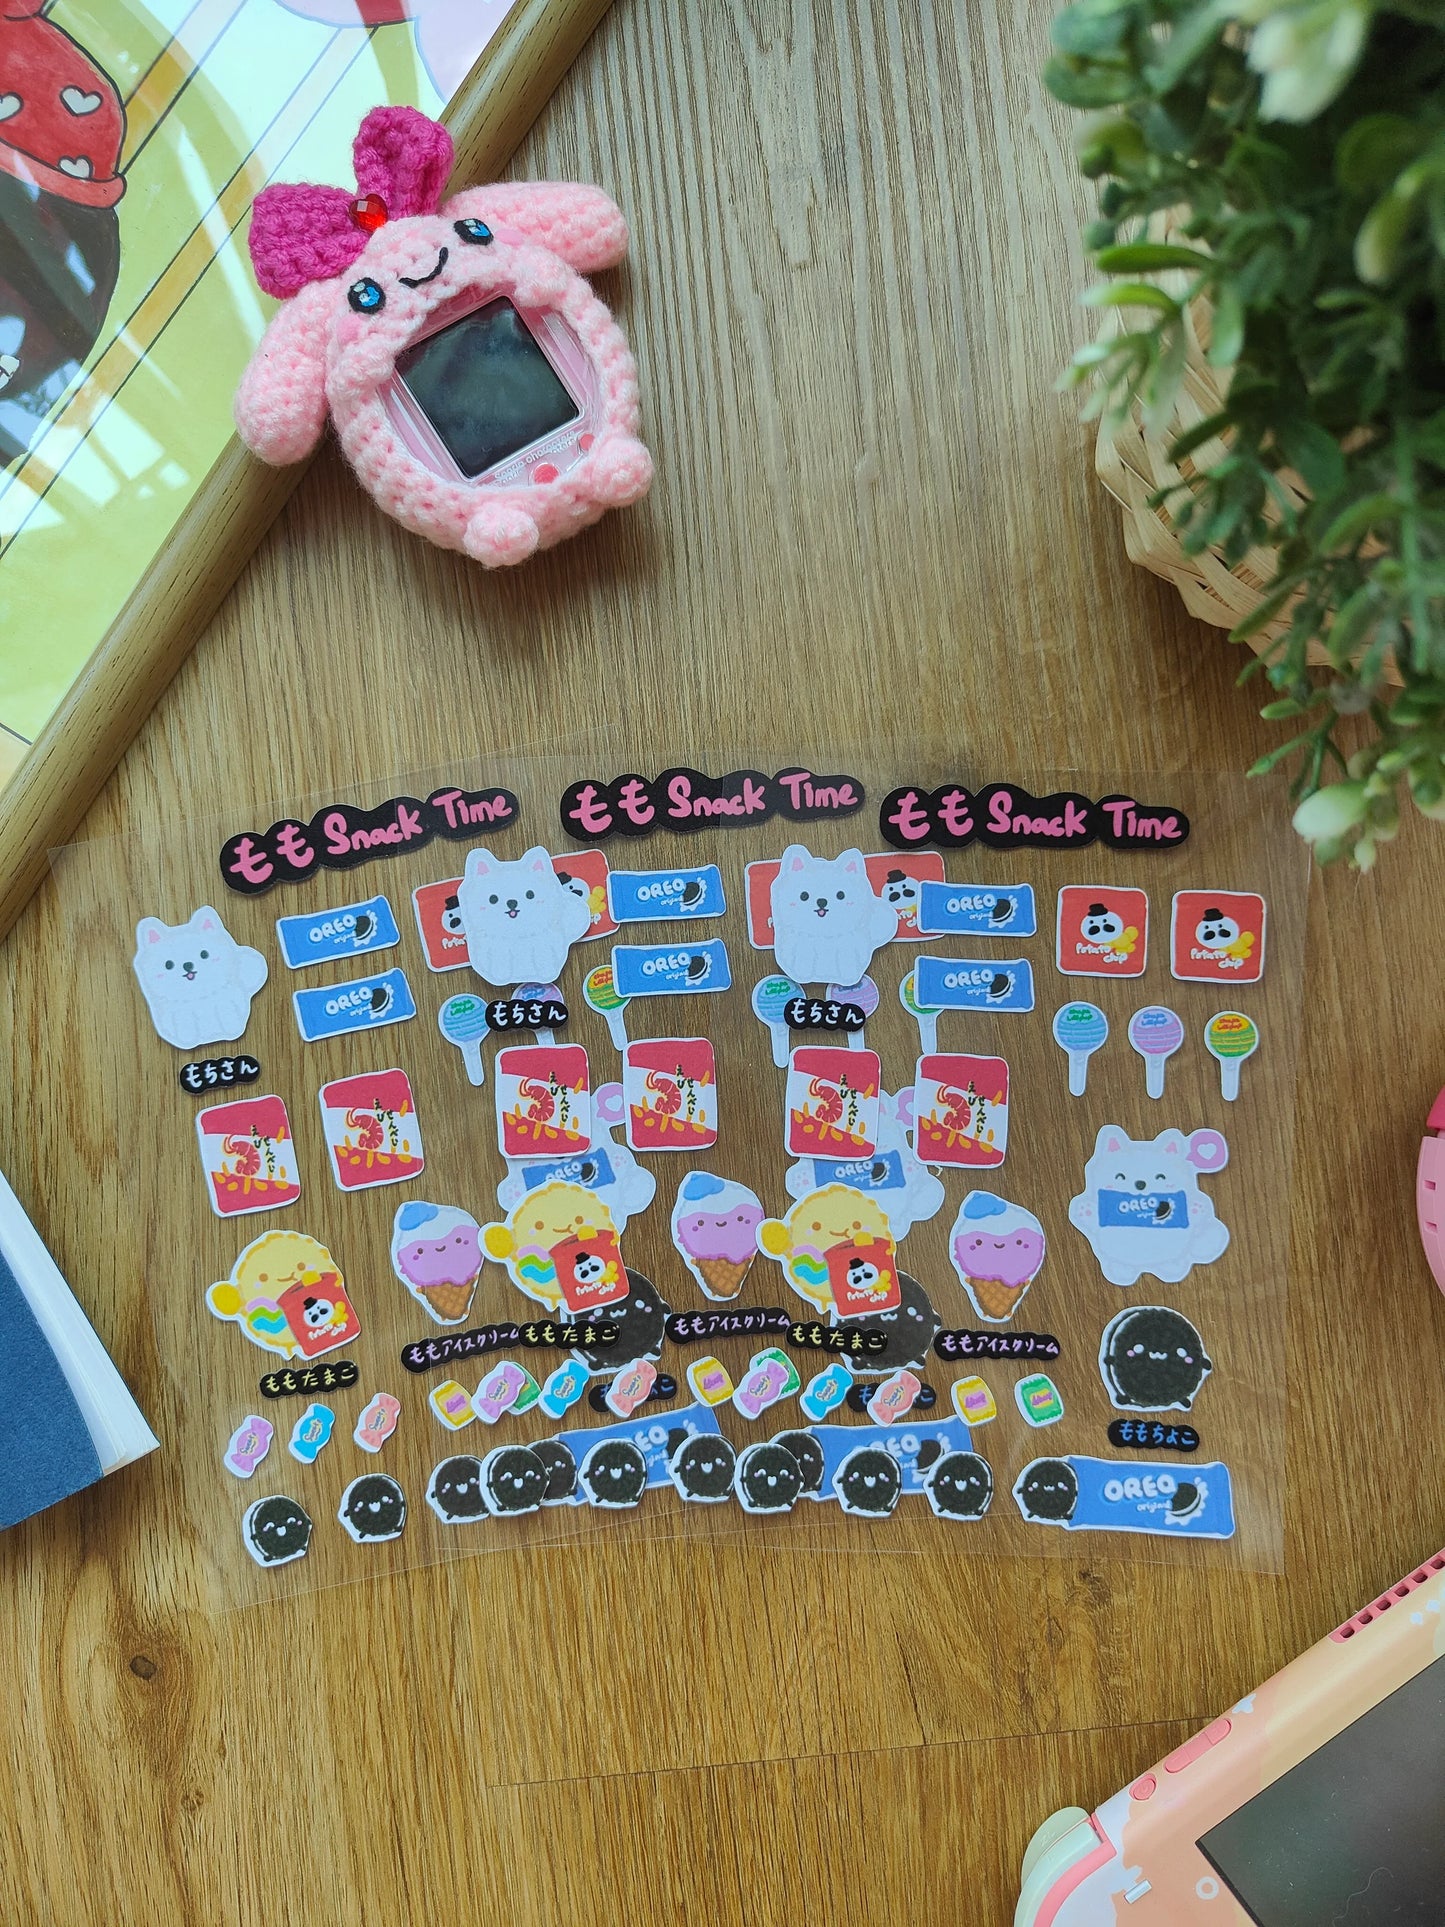 Momo Family Stickers set - Snack Time Fuzzy N Chic